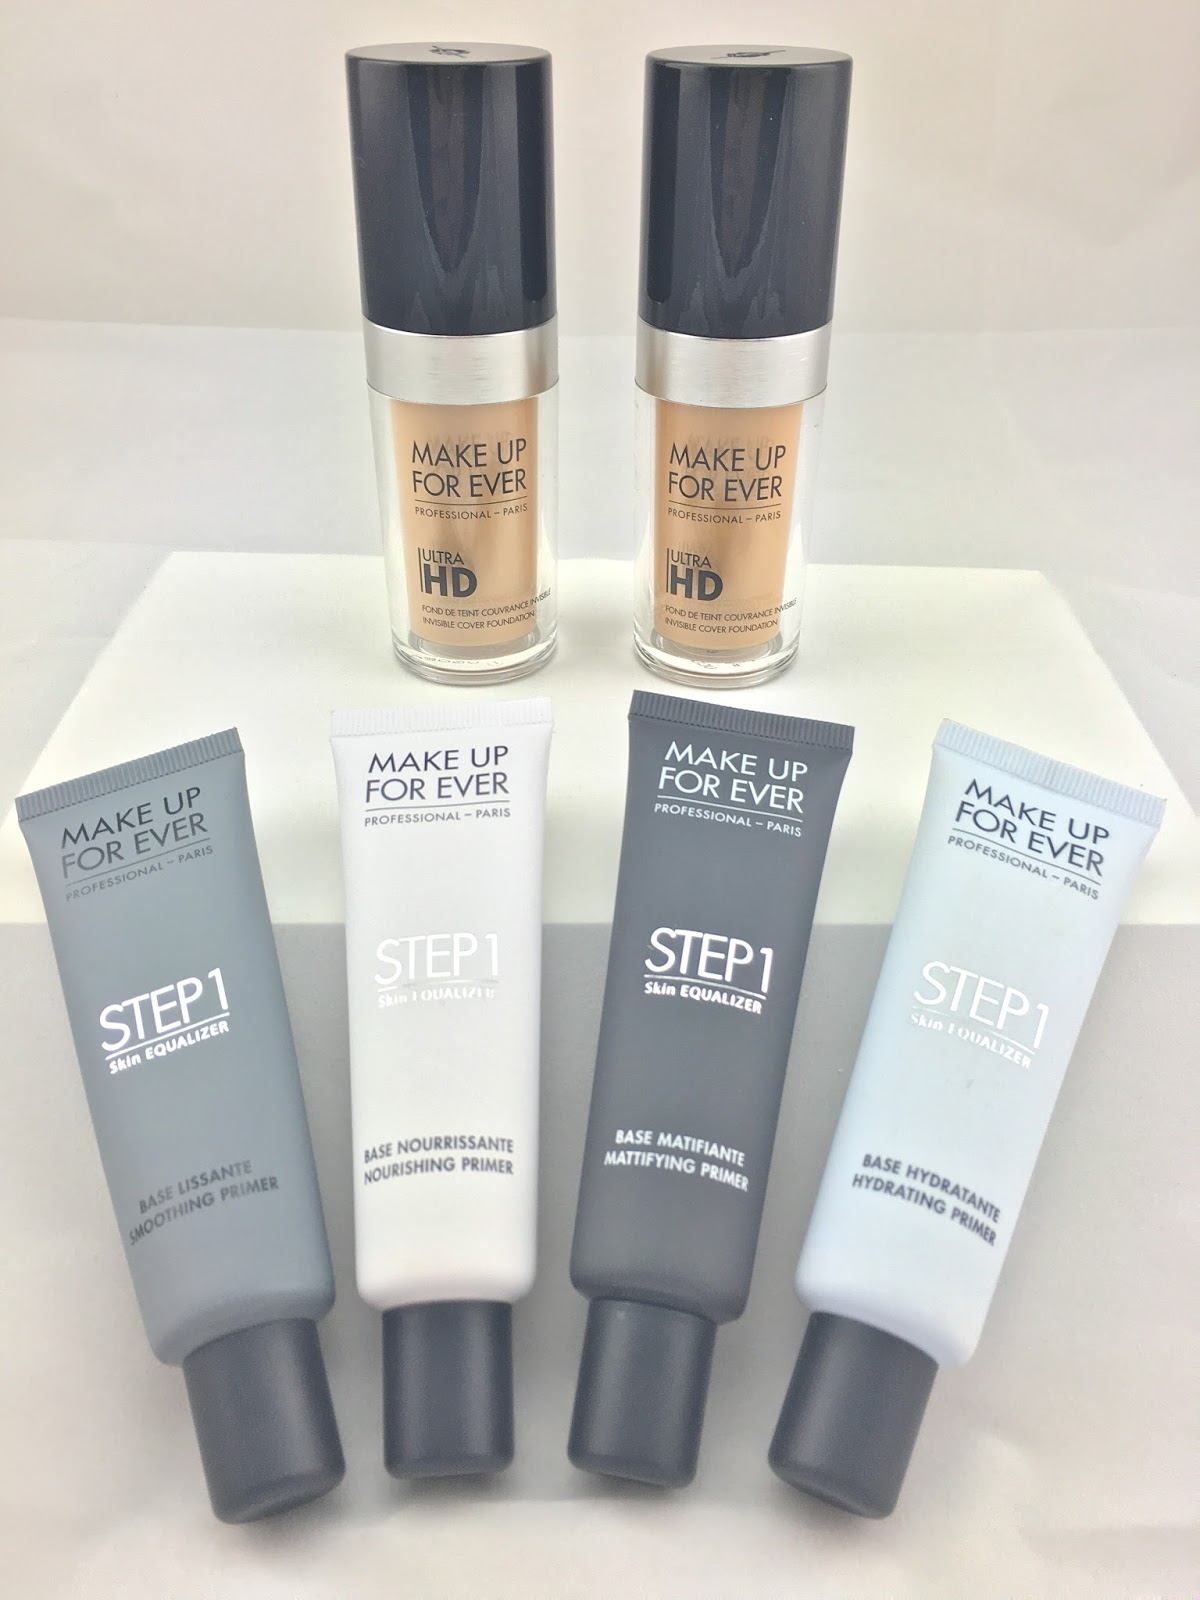 MAKE UP FOR EVER ULTRA HD FOUNDATION - Reviews